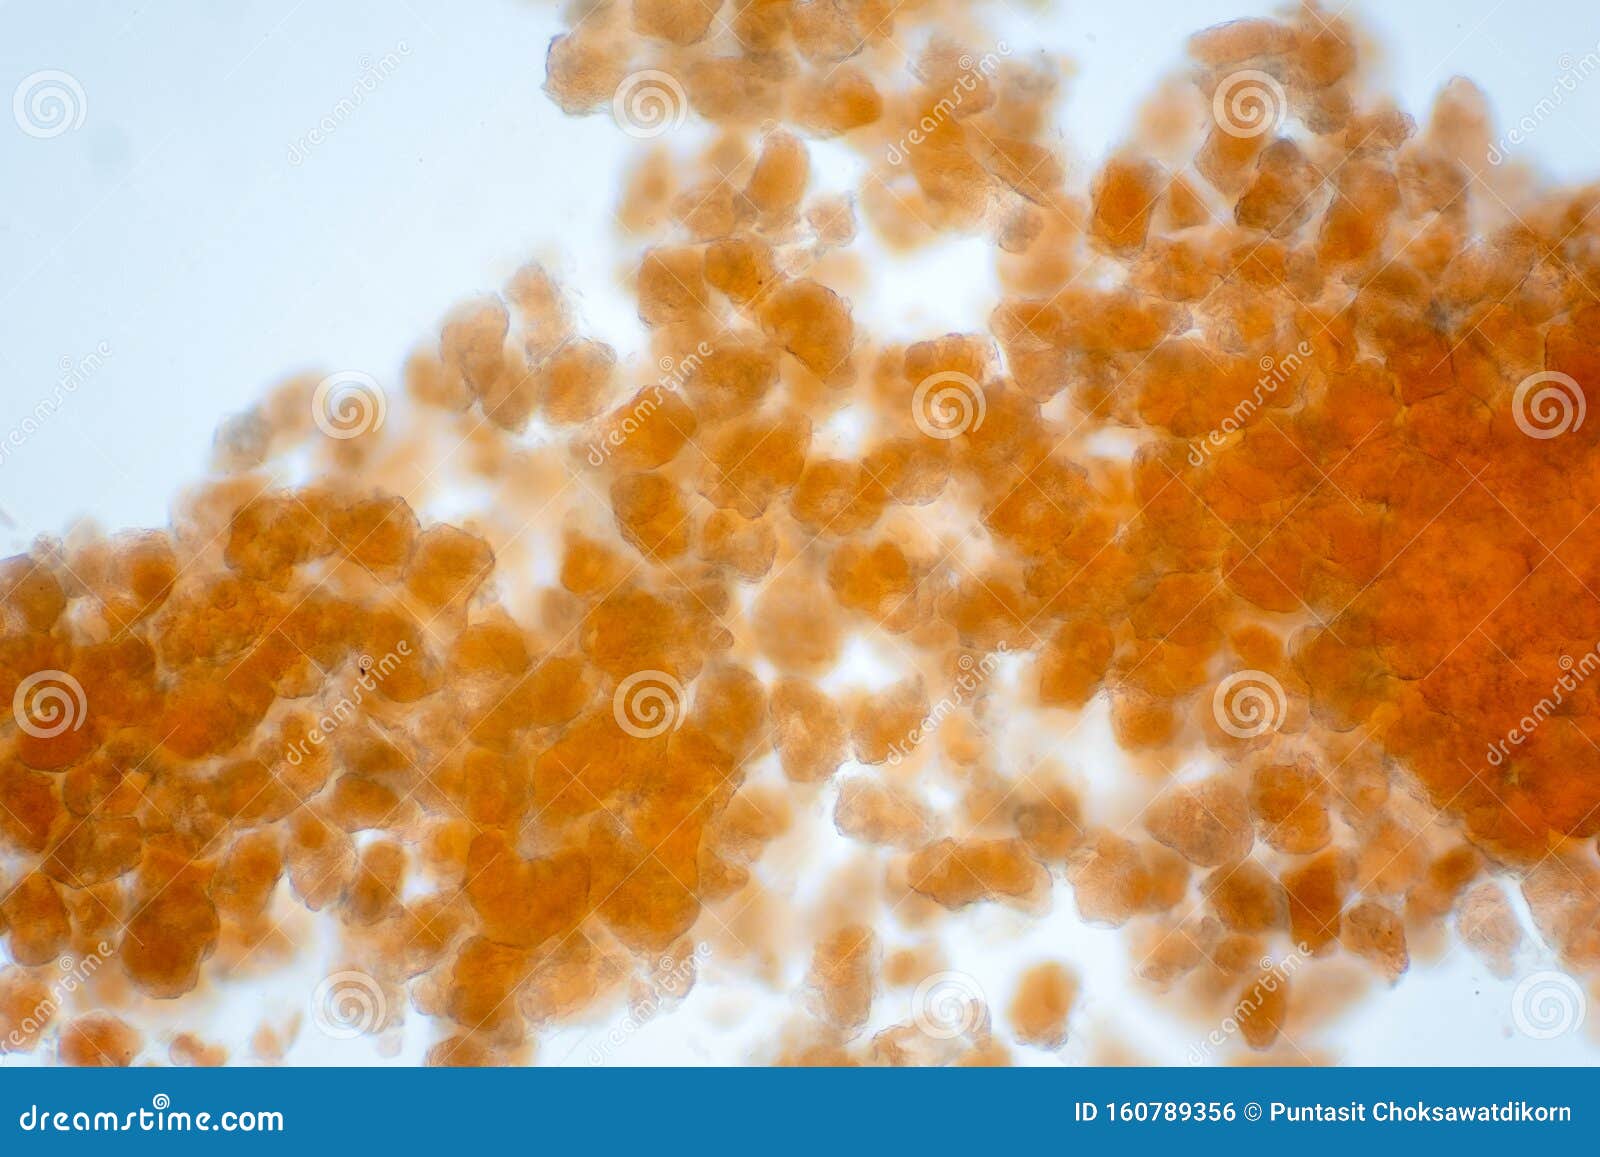 adipose tissue under microscope view show contains large lipid droplet